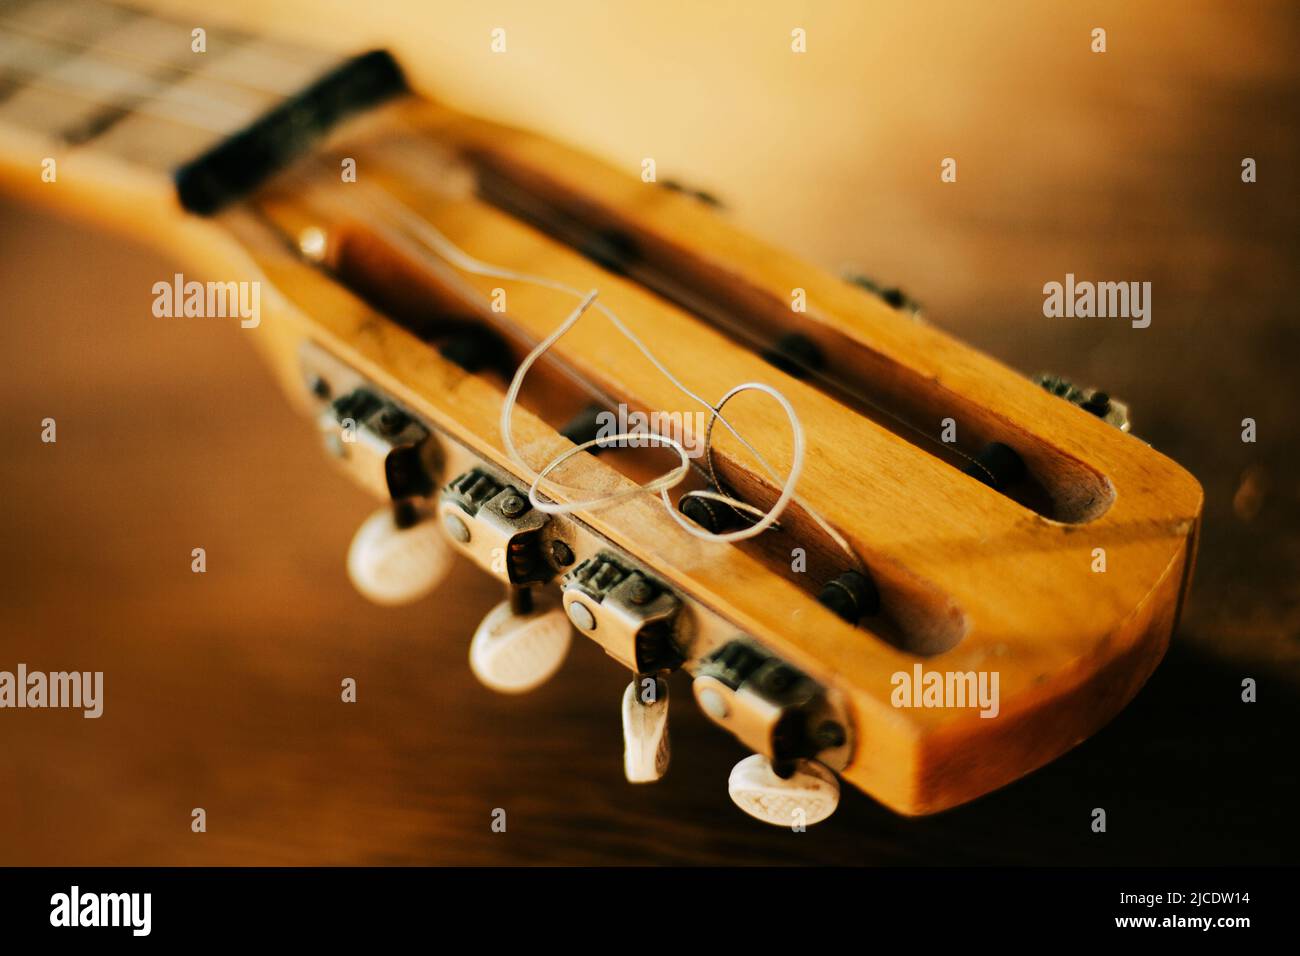 The neck of an old wooden six-string acoustic guitar with metal strings, illuminated by sunlight. Music lessons. Creation. Stock Photo